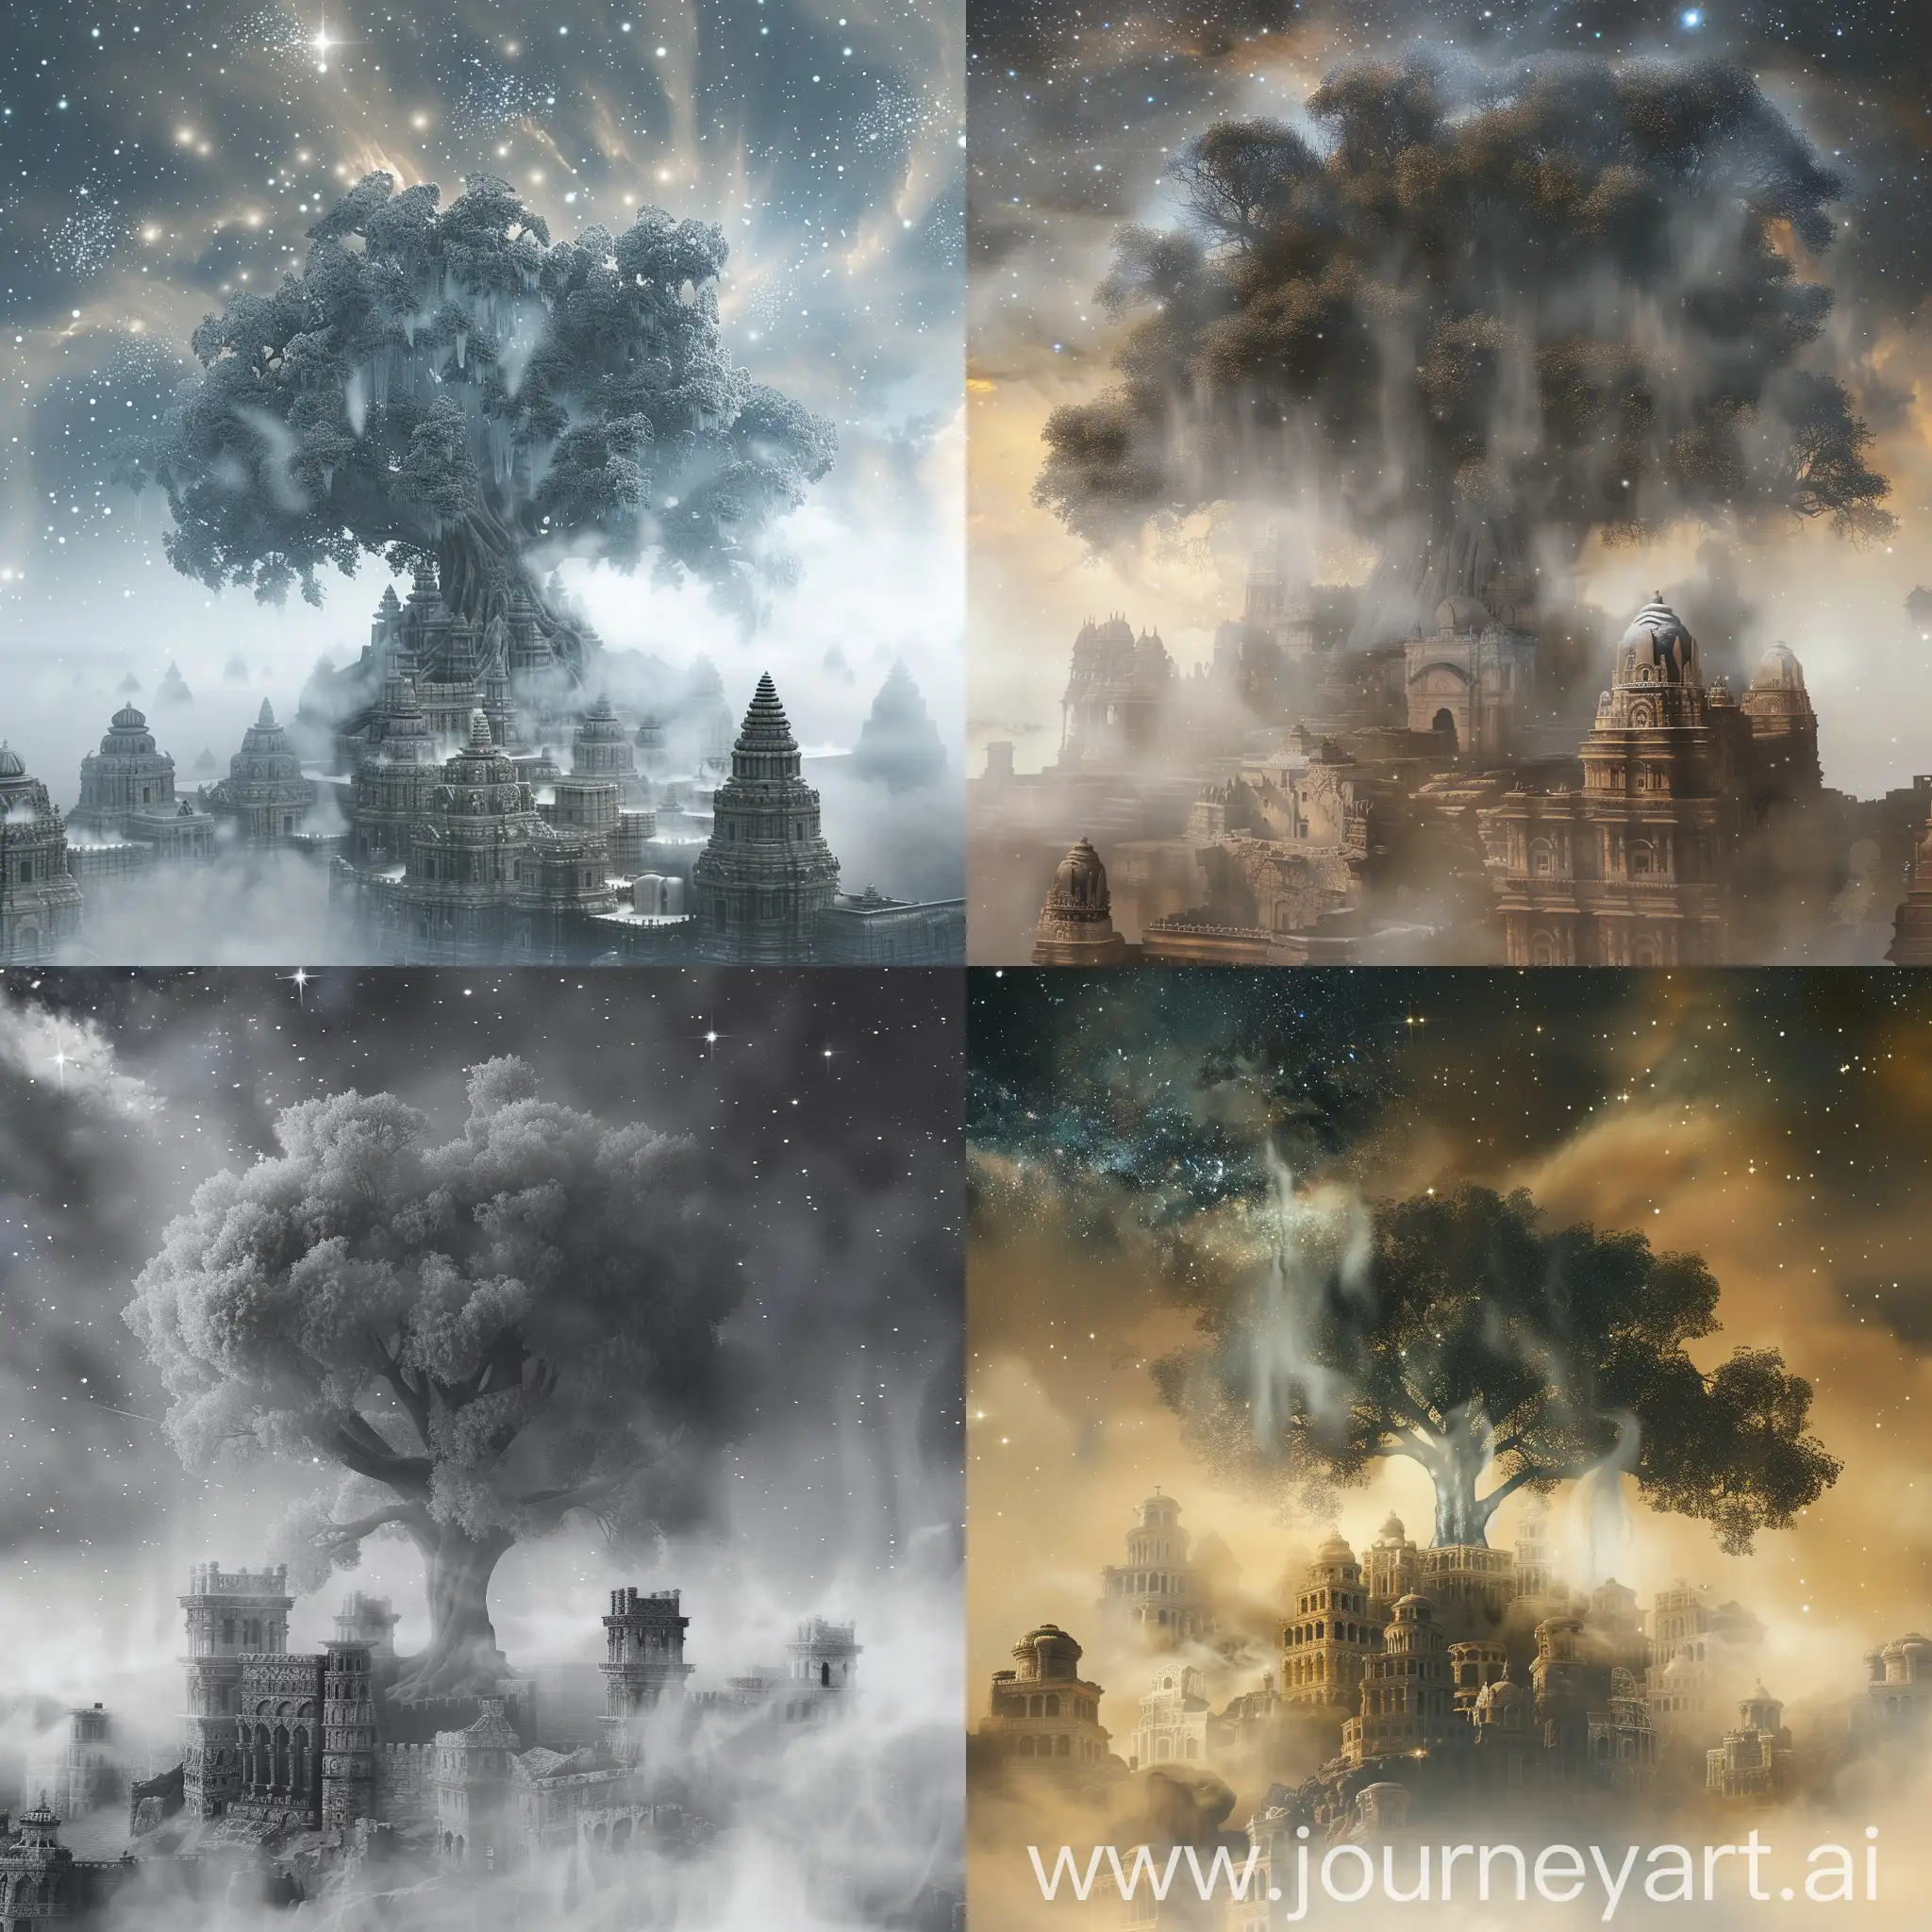 a world made entirely of fog, with a city with blurred ancient buildings built of fog, and a huge tree in the middle of the city made of fog, which has fog instead of bark, and misty crowns stretching to the sky itself. There are stars in the sky. In this world, everything consists of fog, even the tree in the center.